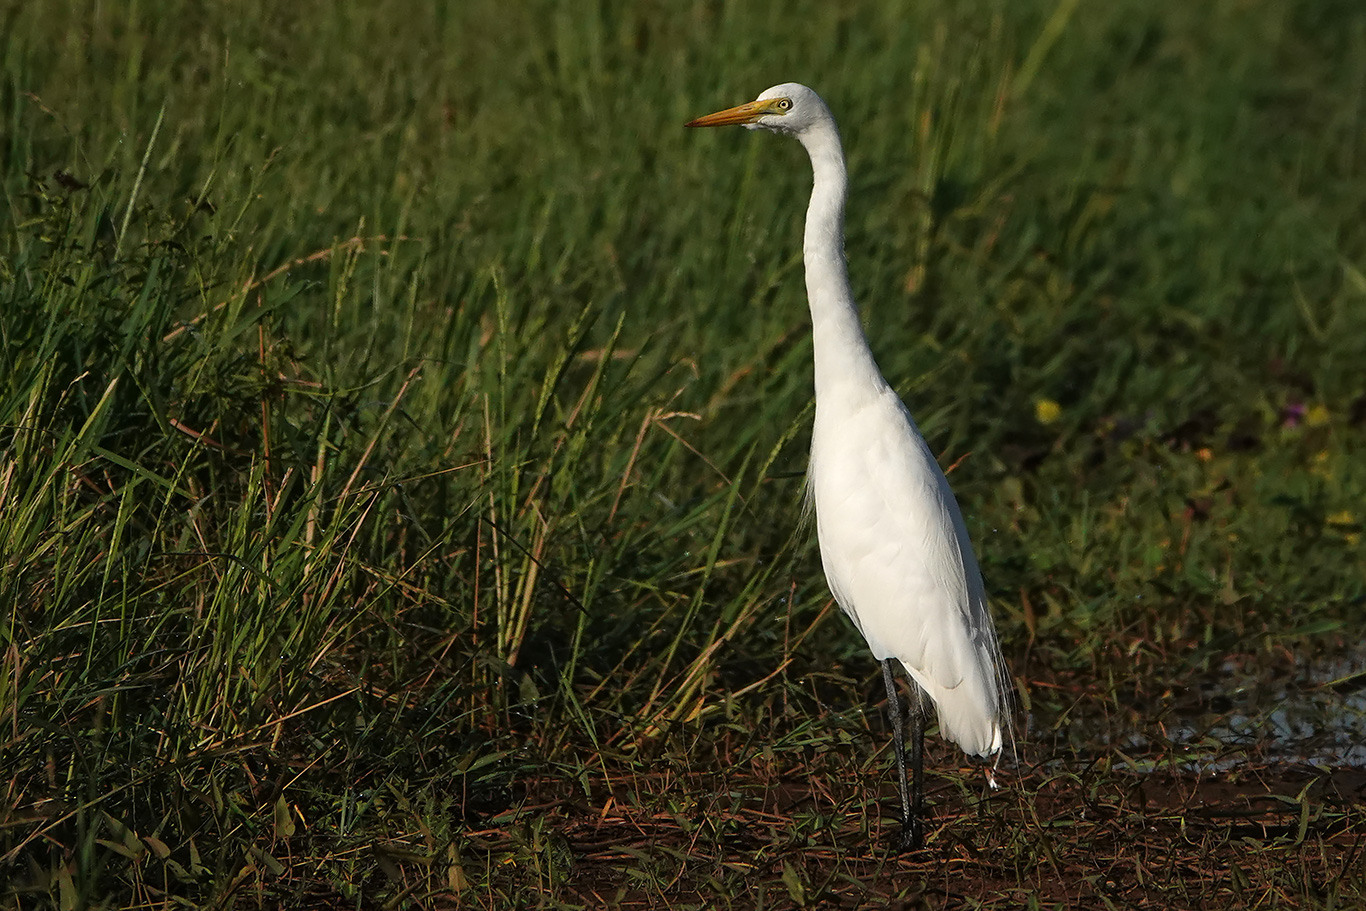 Intermediate Egret, Jakhaly, The Gambia.